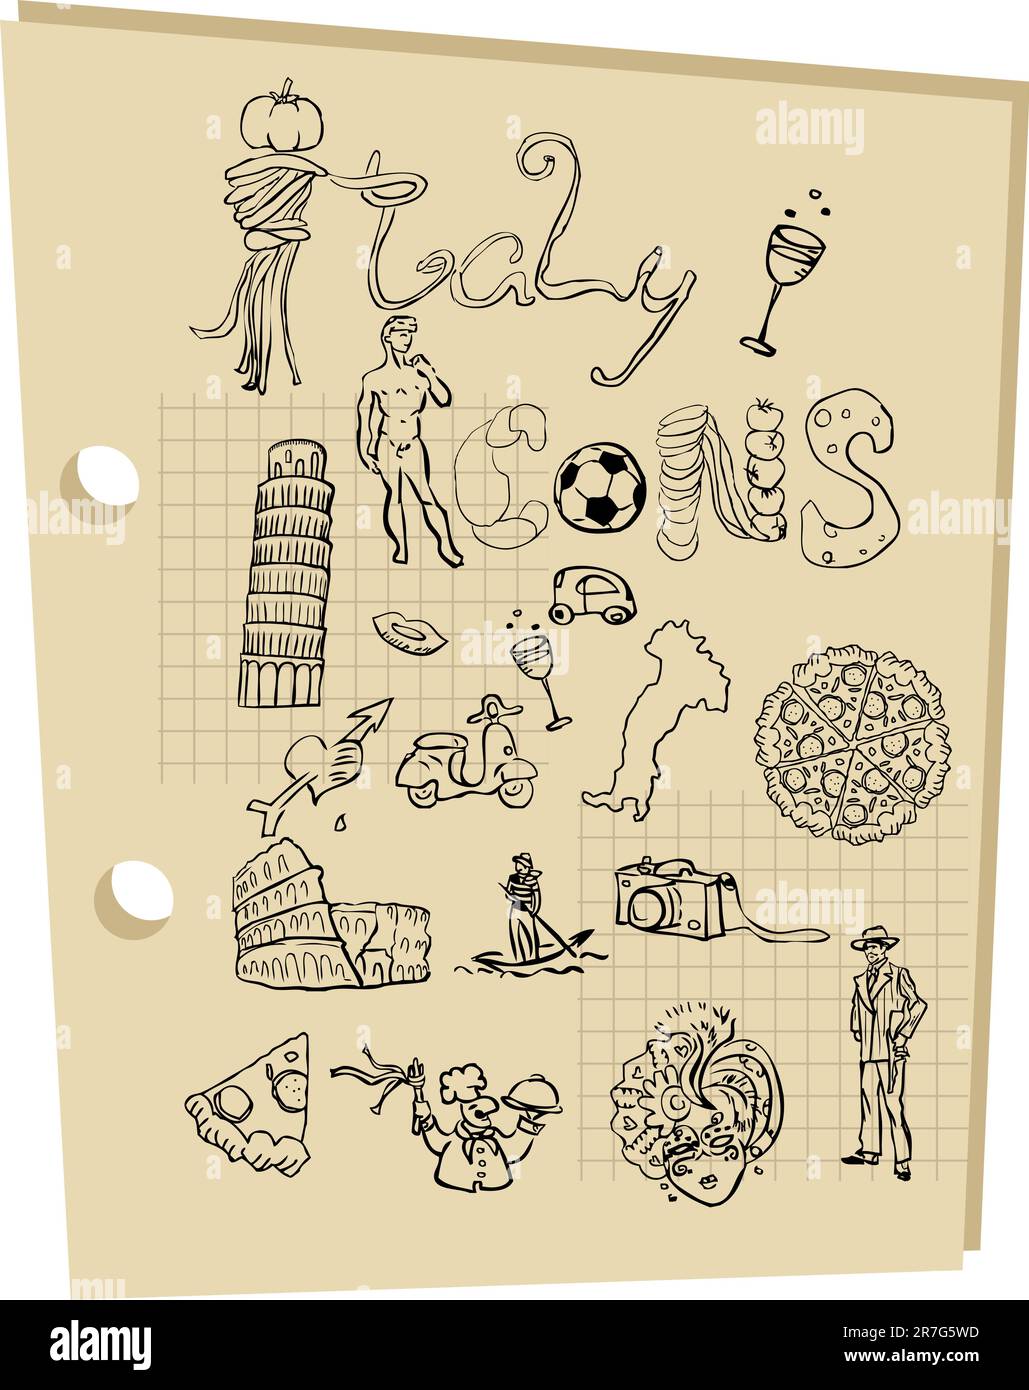 Italy tattoo doodley icons Stock Vector